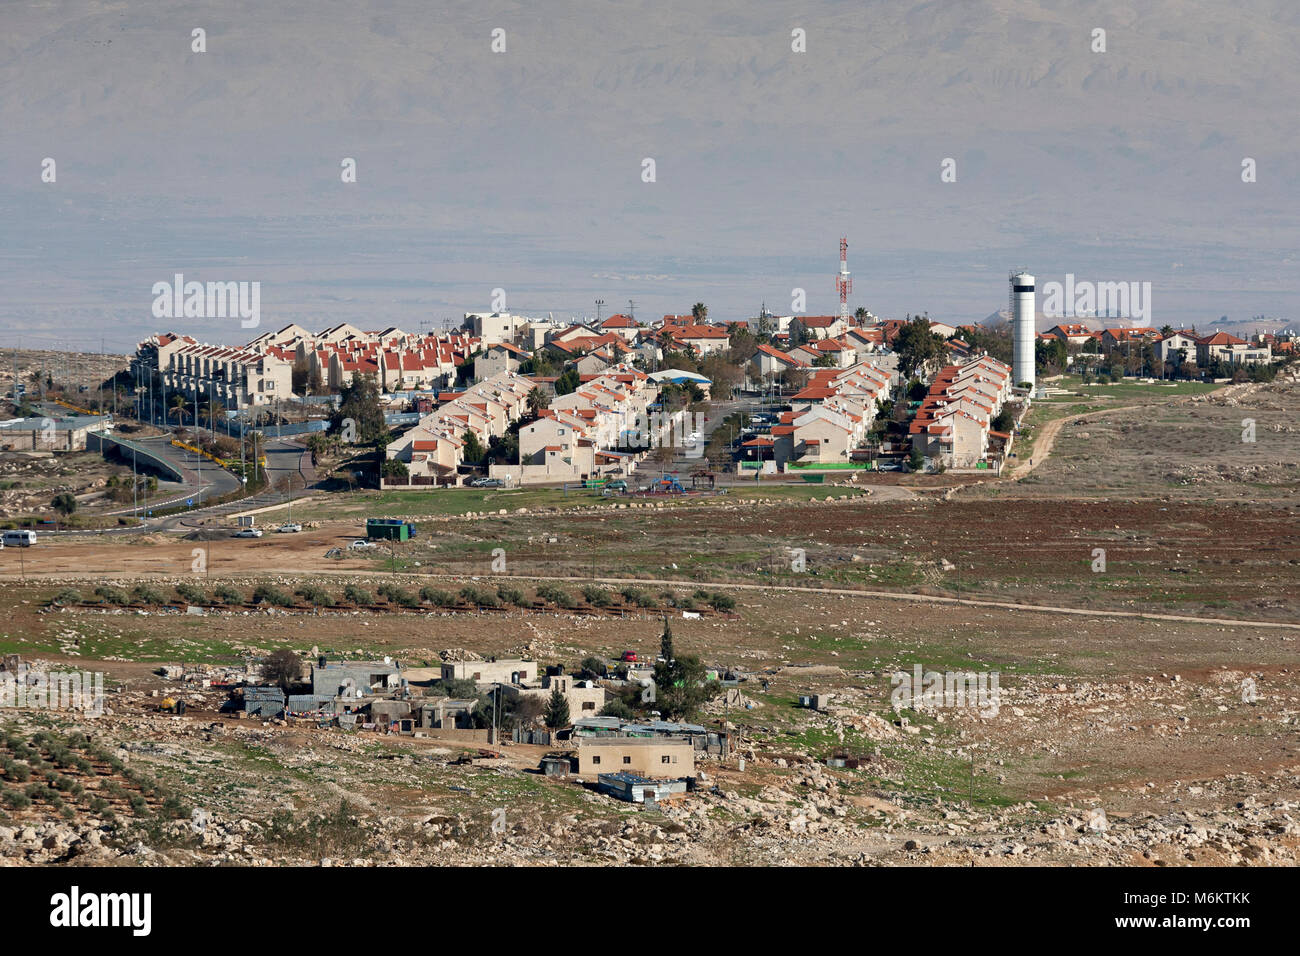 Jerusalem, Palestine, January 12, 2011: Jewish settlement built on the grounds which are recognized as Palestinian Occupied Territories by internation Stock Photo